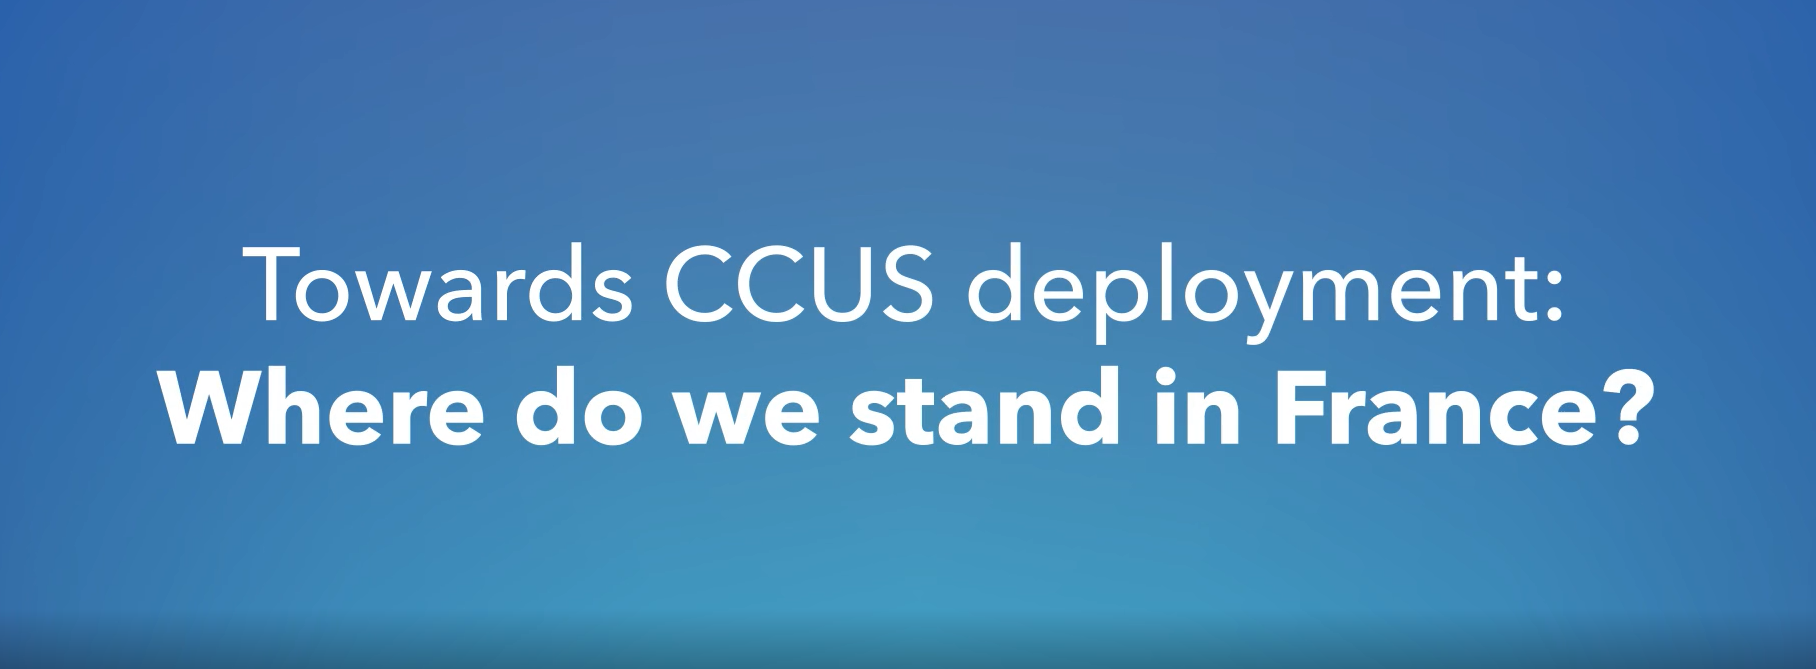 Towards CCUS deployment: where do we stand in France?